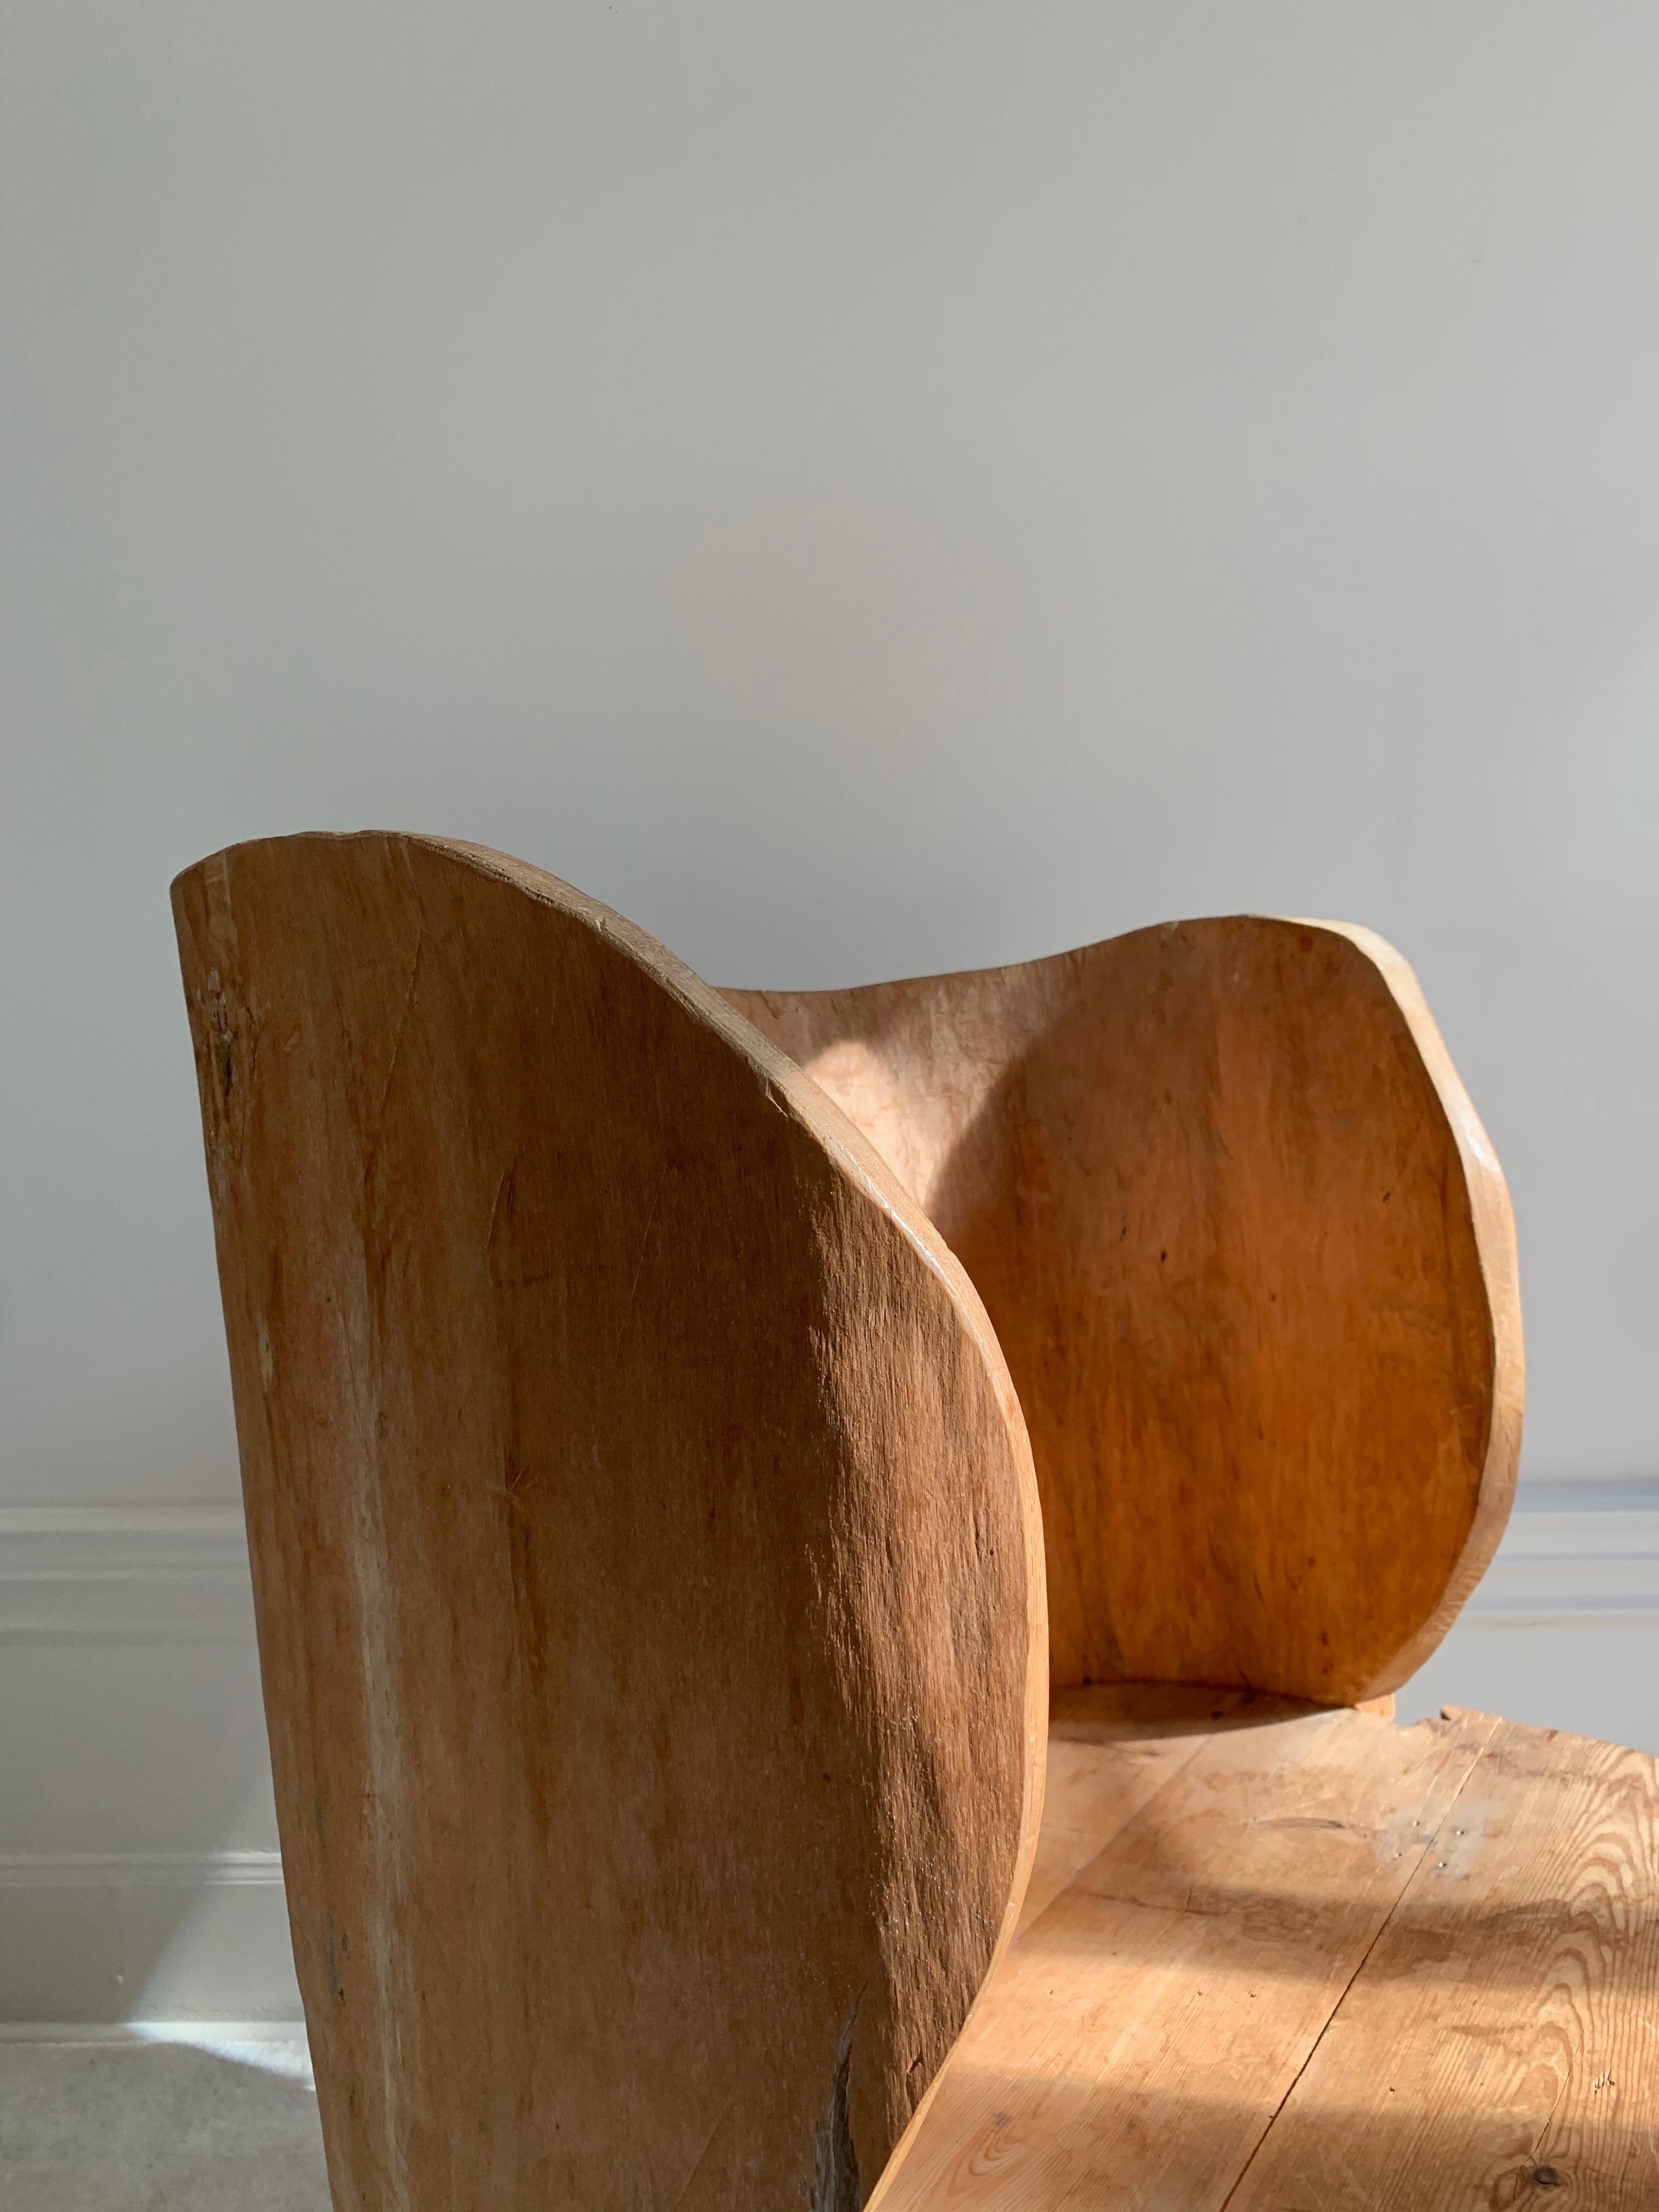 Rare and unique stump chair in a Brutalist style made by unknown designer / maker in Sweden. In good overall condition with a nice and warm patina.